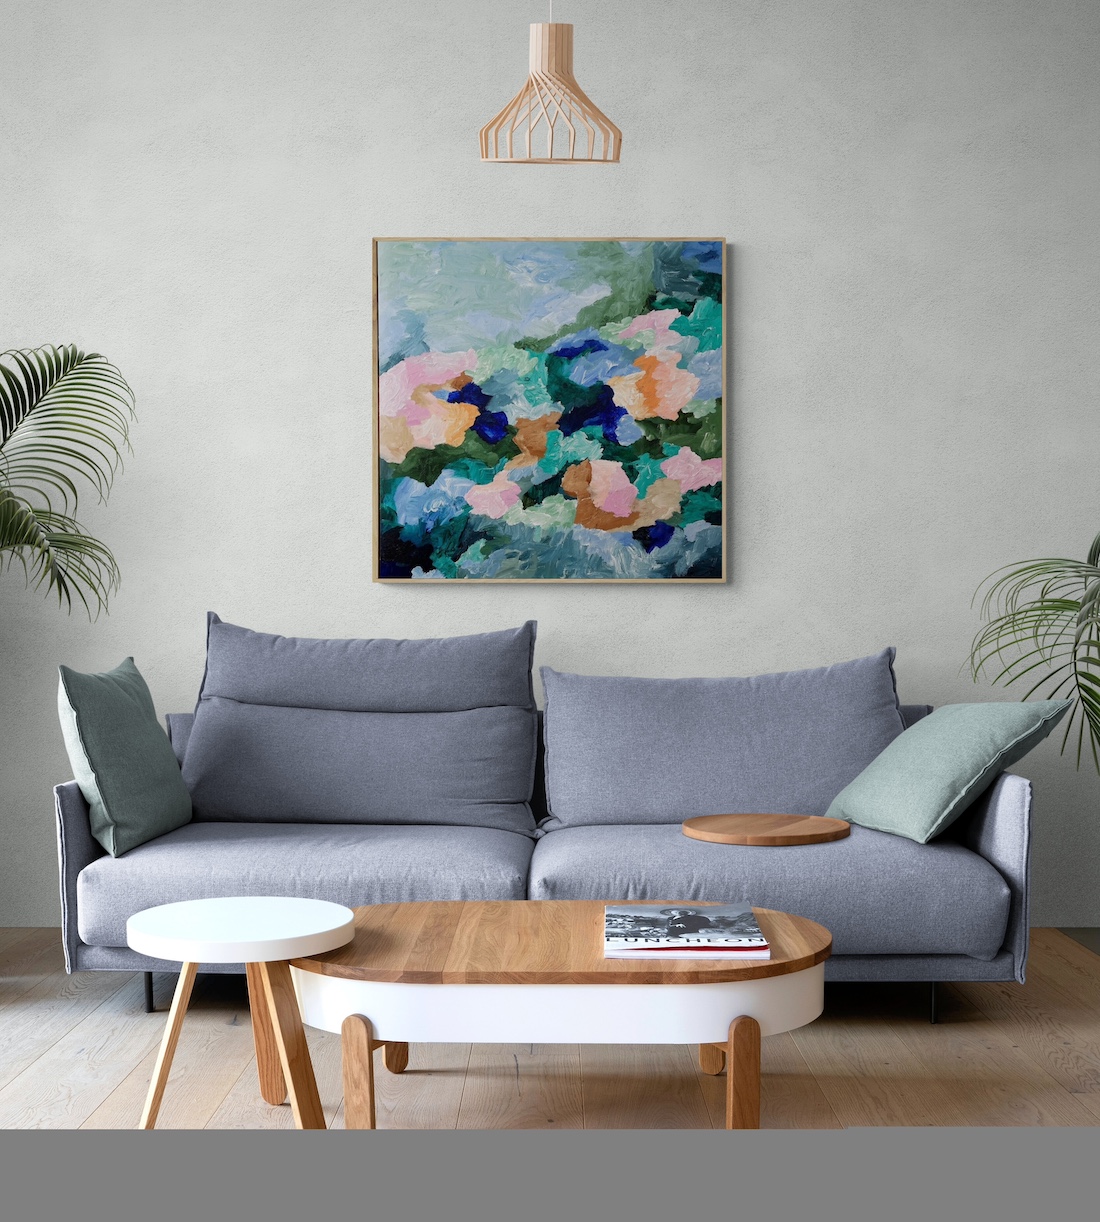 Abstract artwork hanging in living room by Lena B art